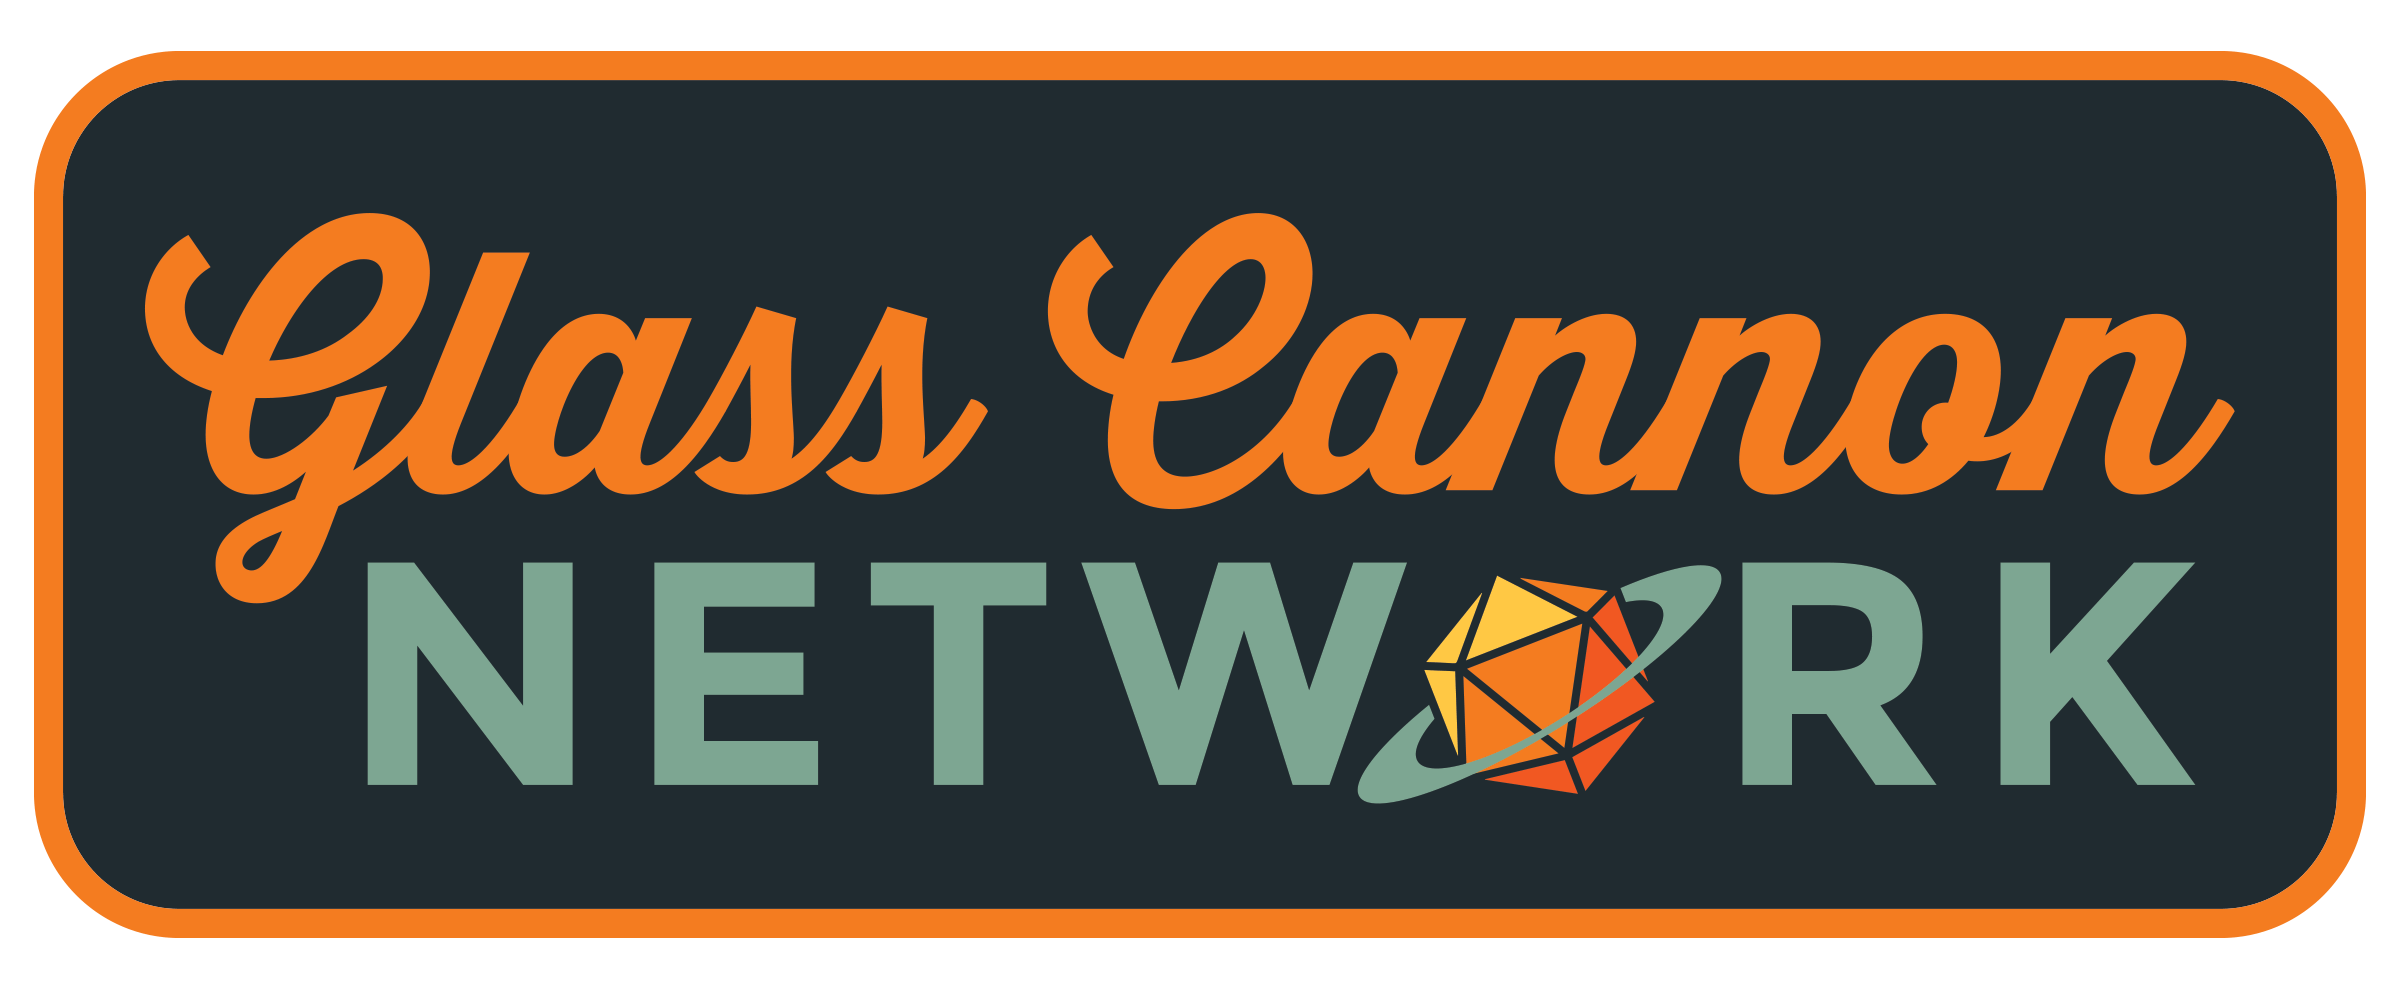 Glass Cannon Network